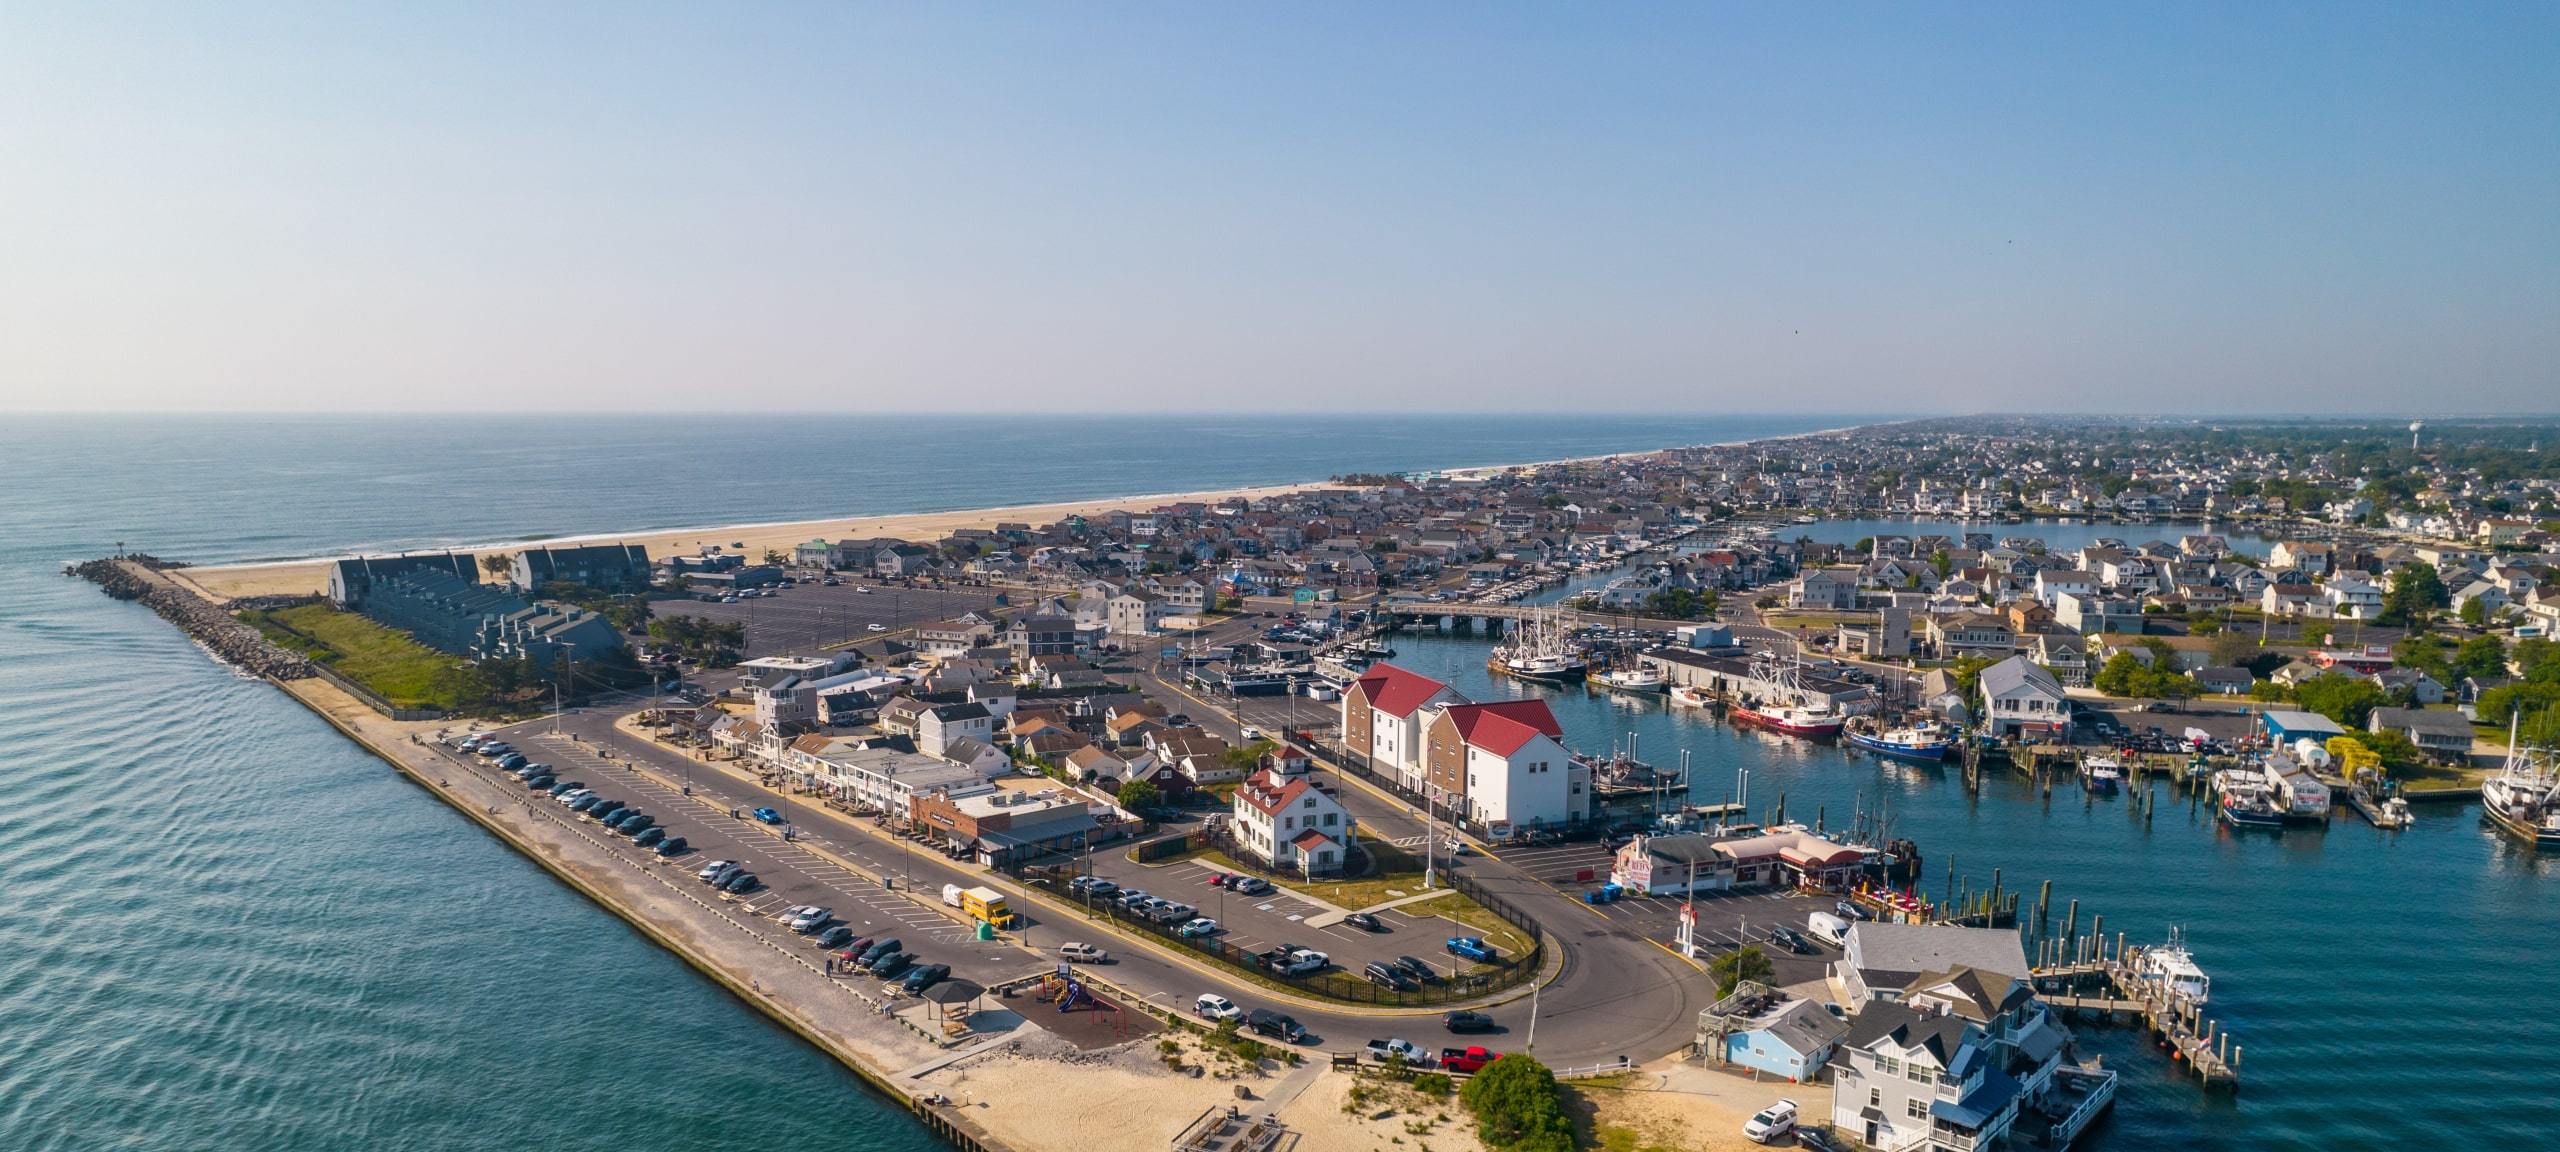 Aerial view over inlet and beach in Point Pleasant Beach, New Jersey